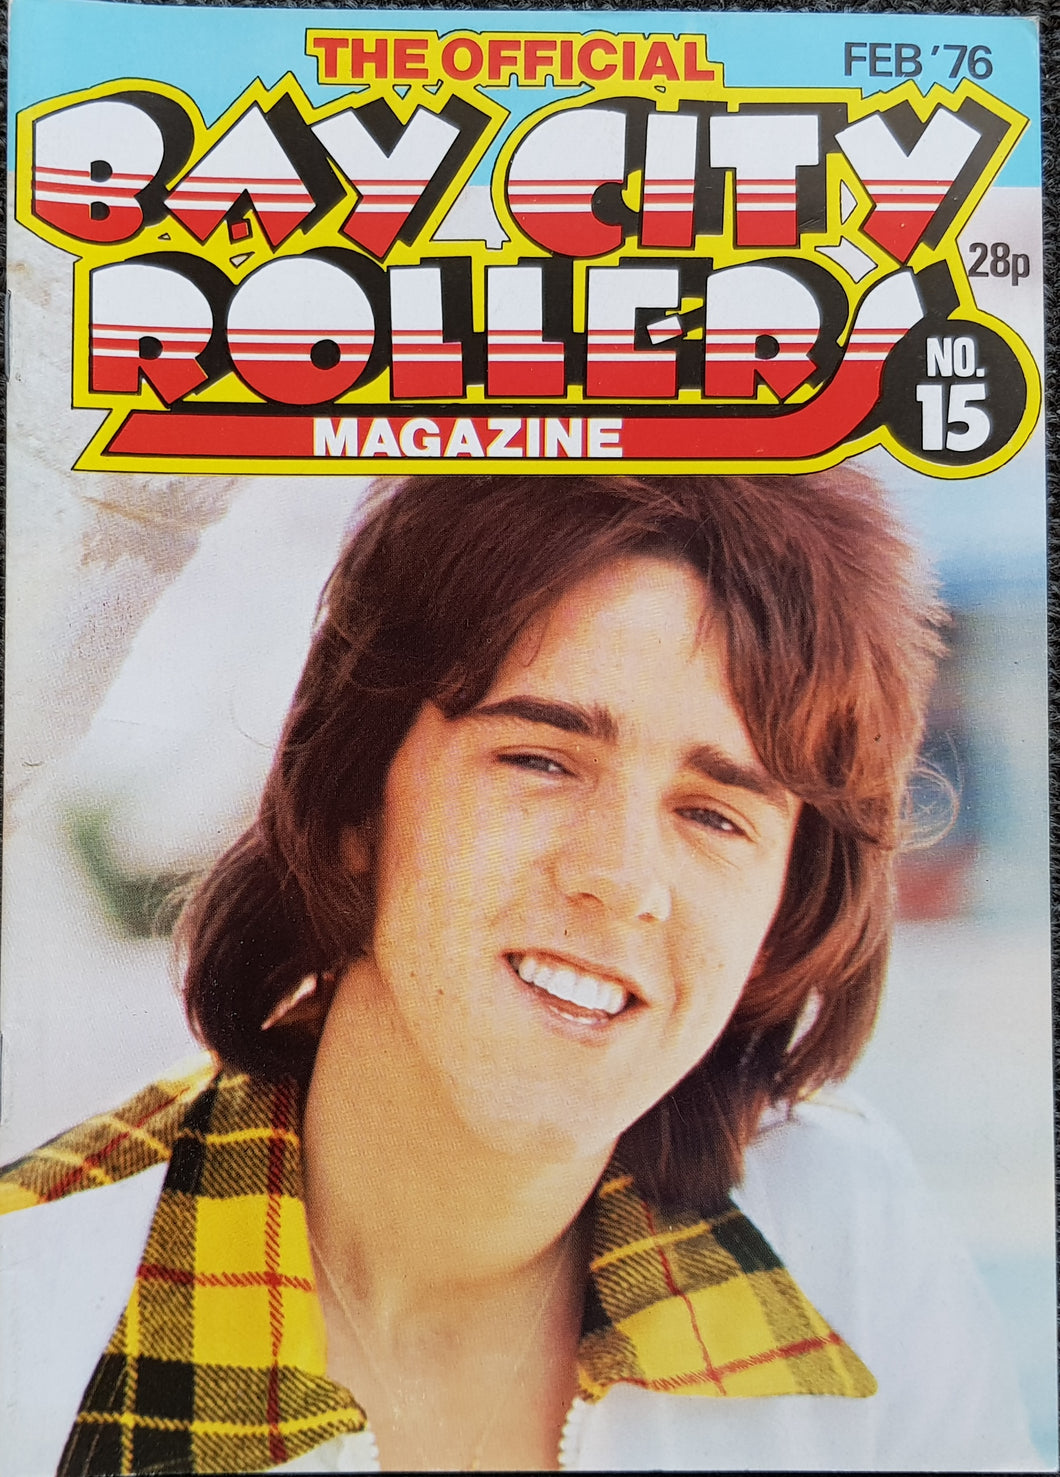 Bay City Rollers - The Official Bay City Rollers Magazine No.15